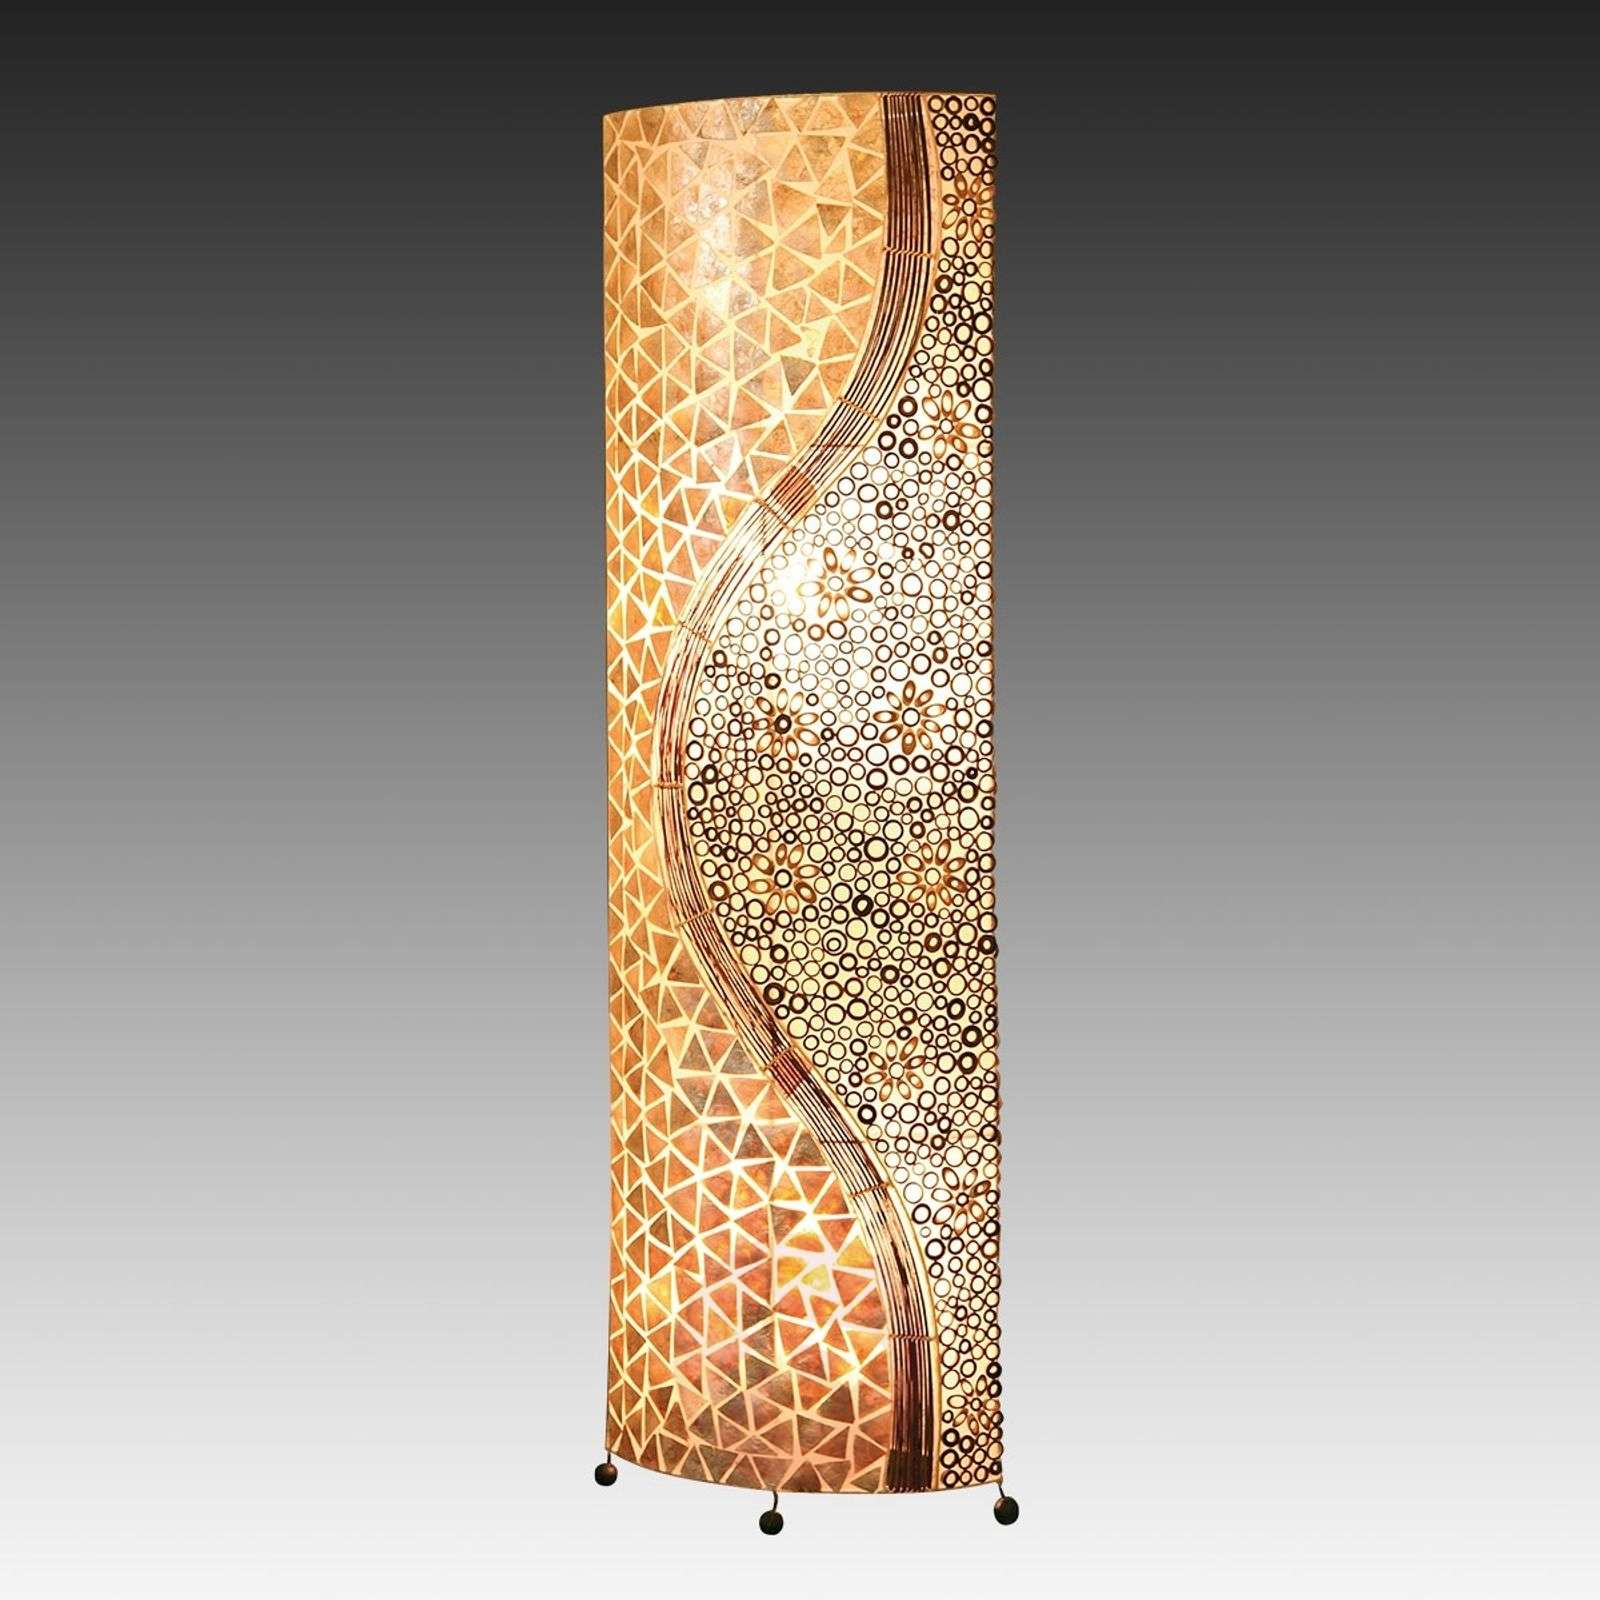 Bali Ethnic Look Oval Mother Of Pearl Floor Lamp intended for dimensions 1600 X 1600